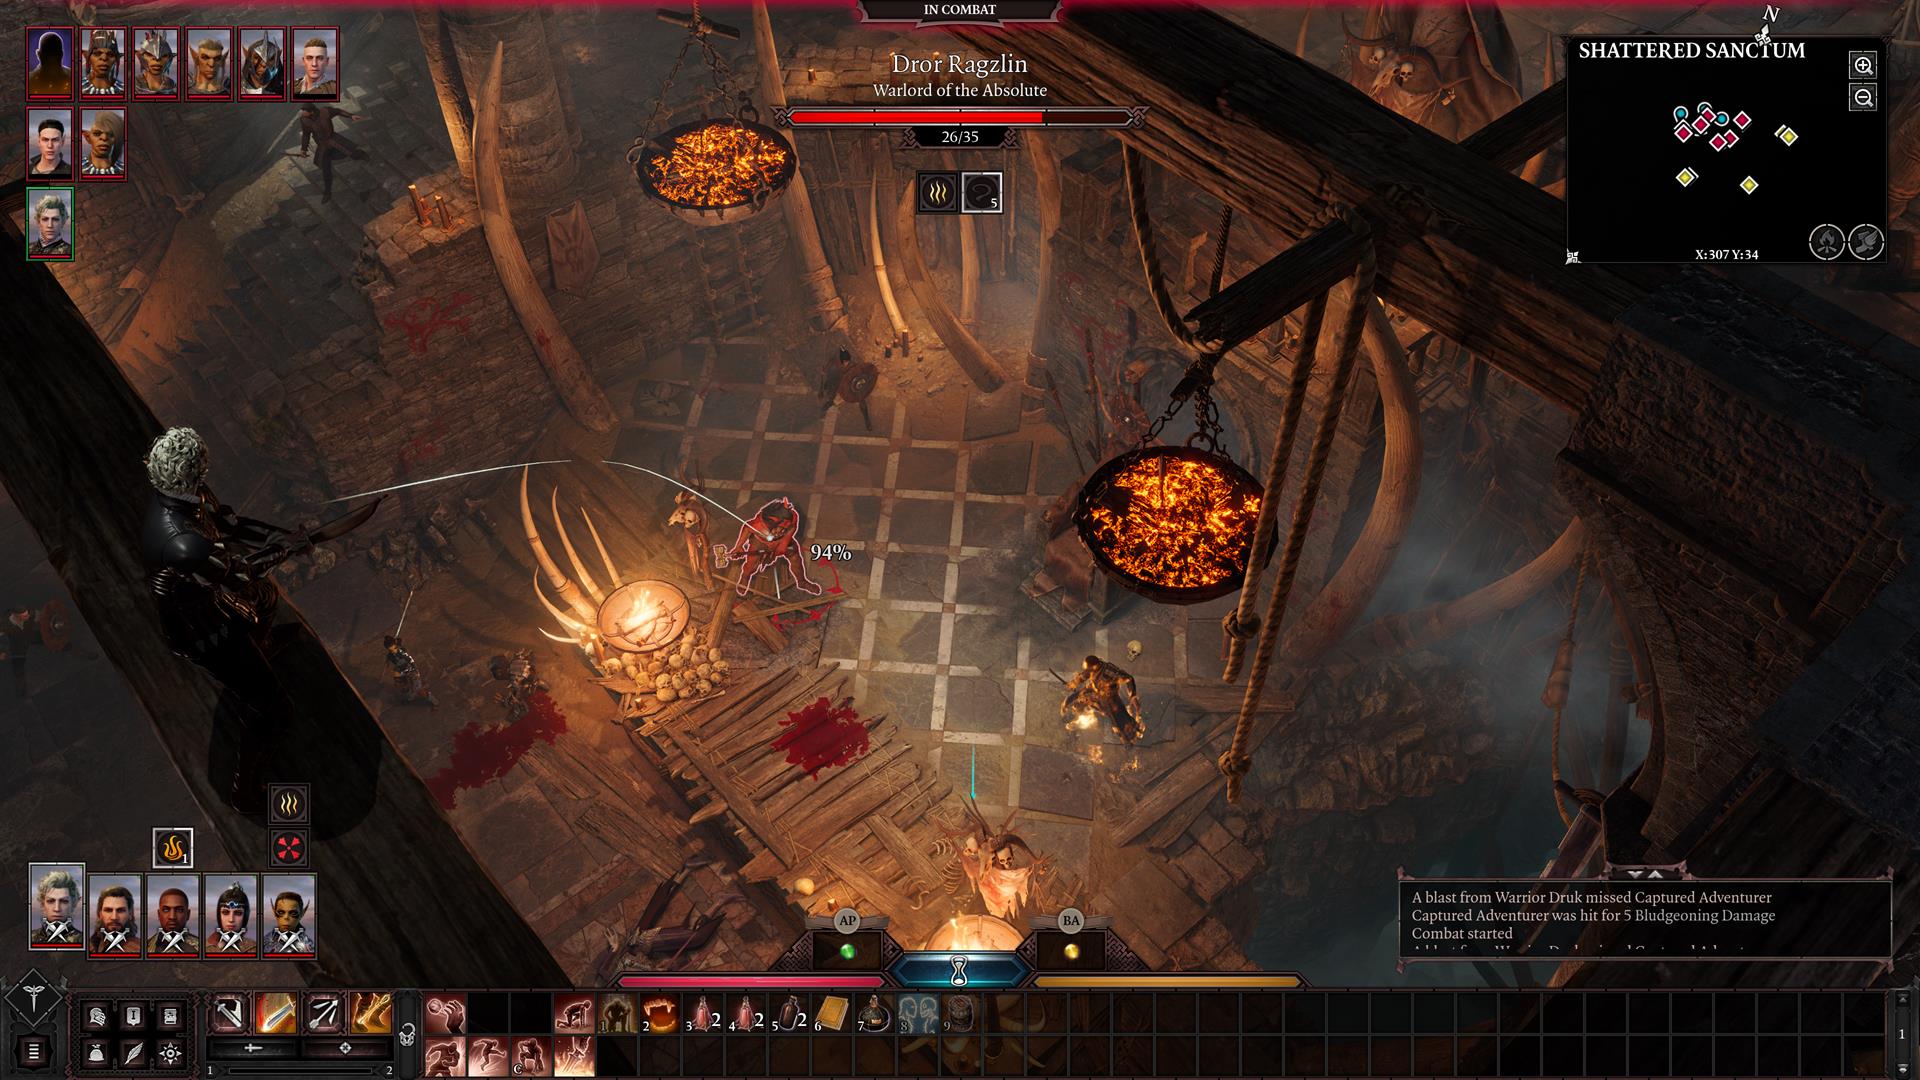 You can play through Baldur's Gate 3 in turnbased mode from start to